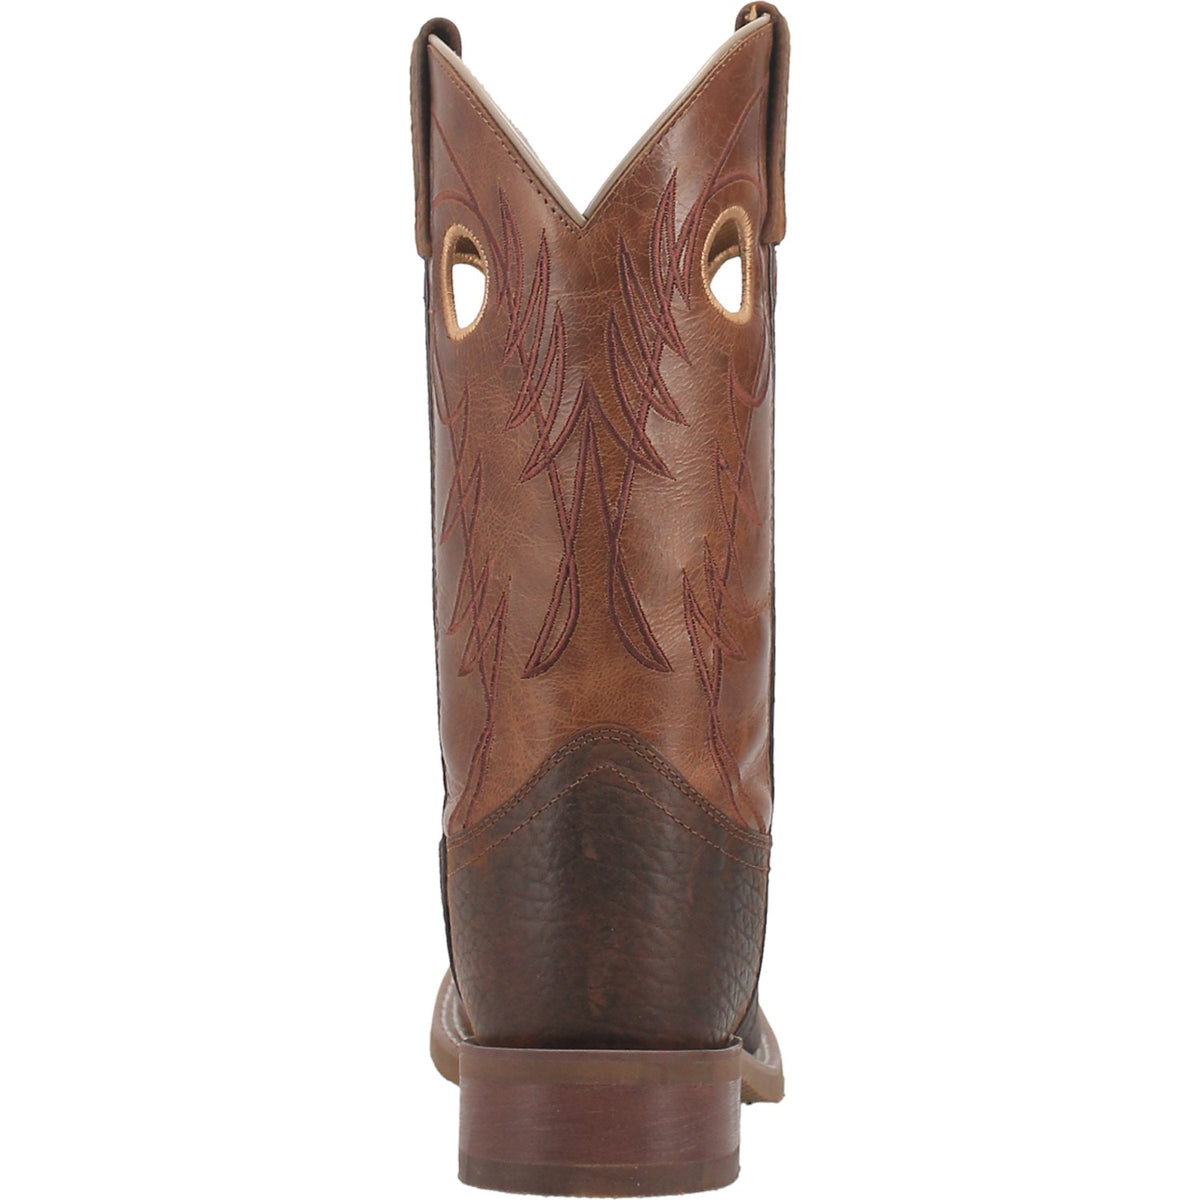 RIPLEY LEATHER BOOT Cover